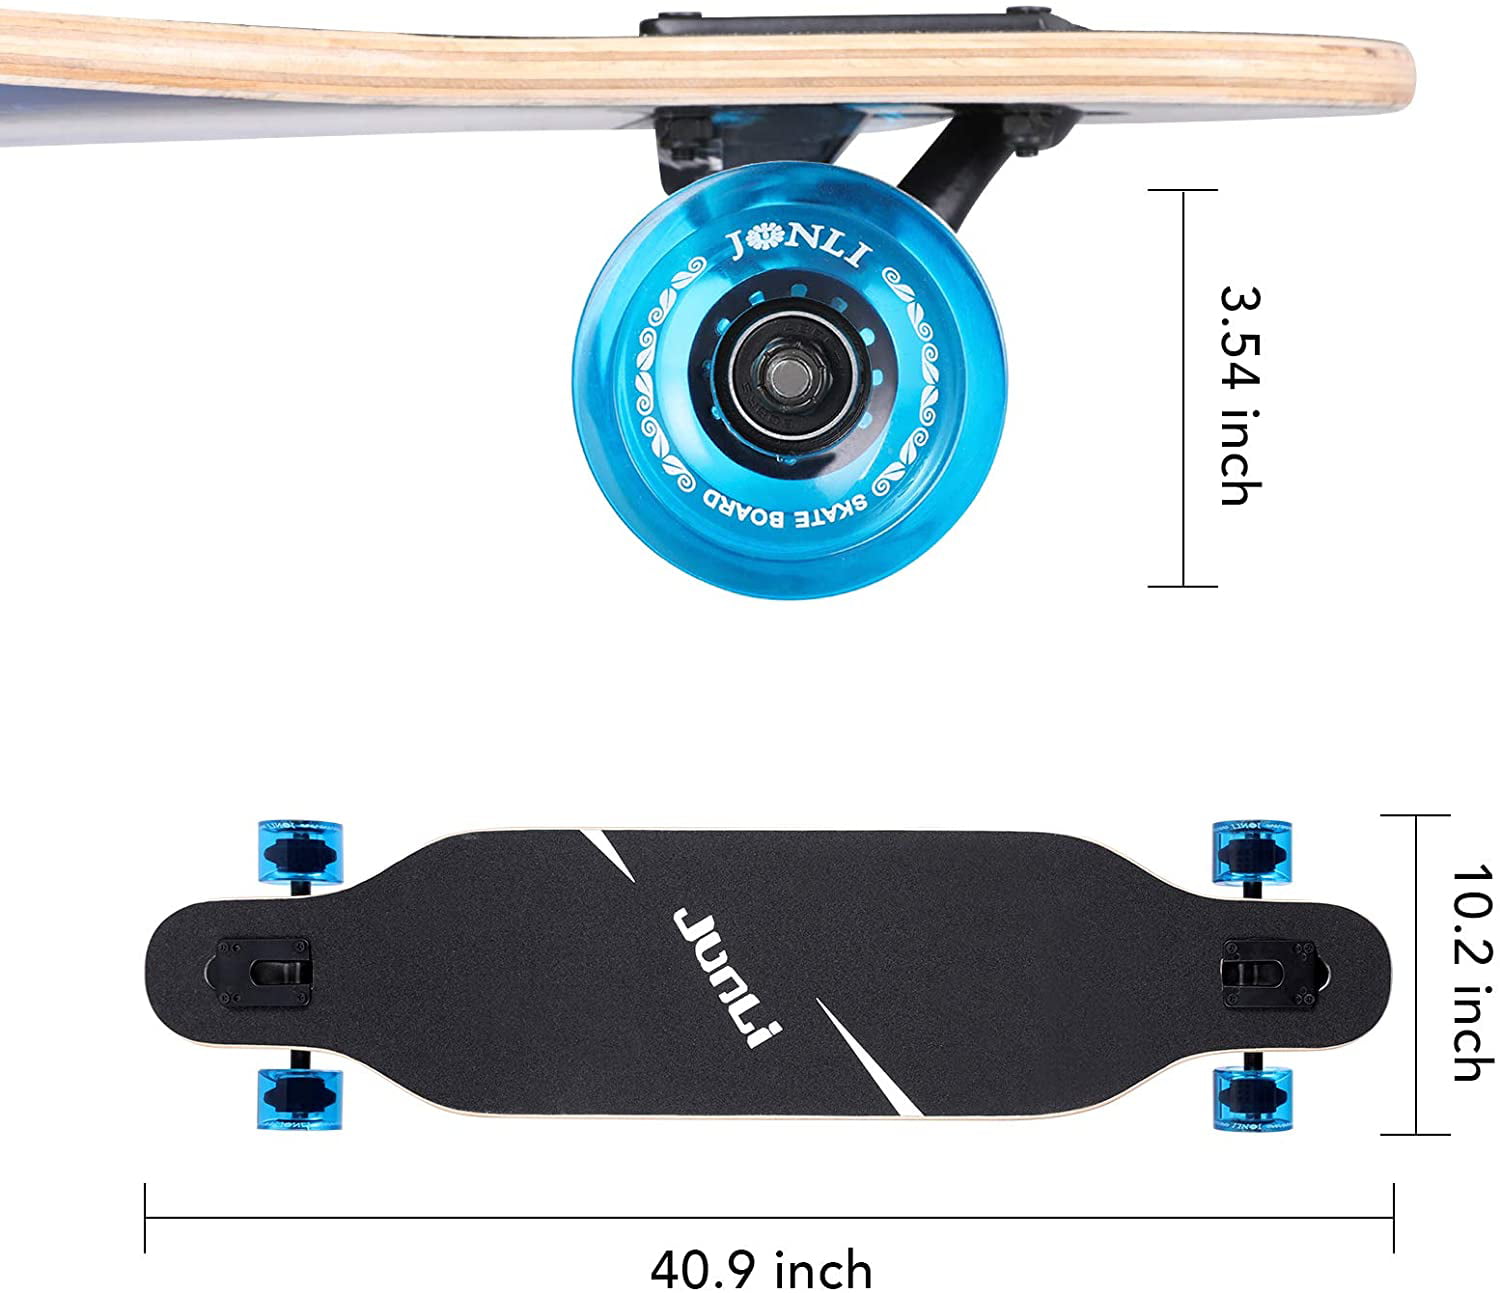 Carving Free-Style and Downhill Junli 41 Inch Freeride Skateboard Longboard Complete Skateboard Cruiser for Cruising